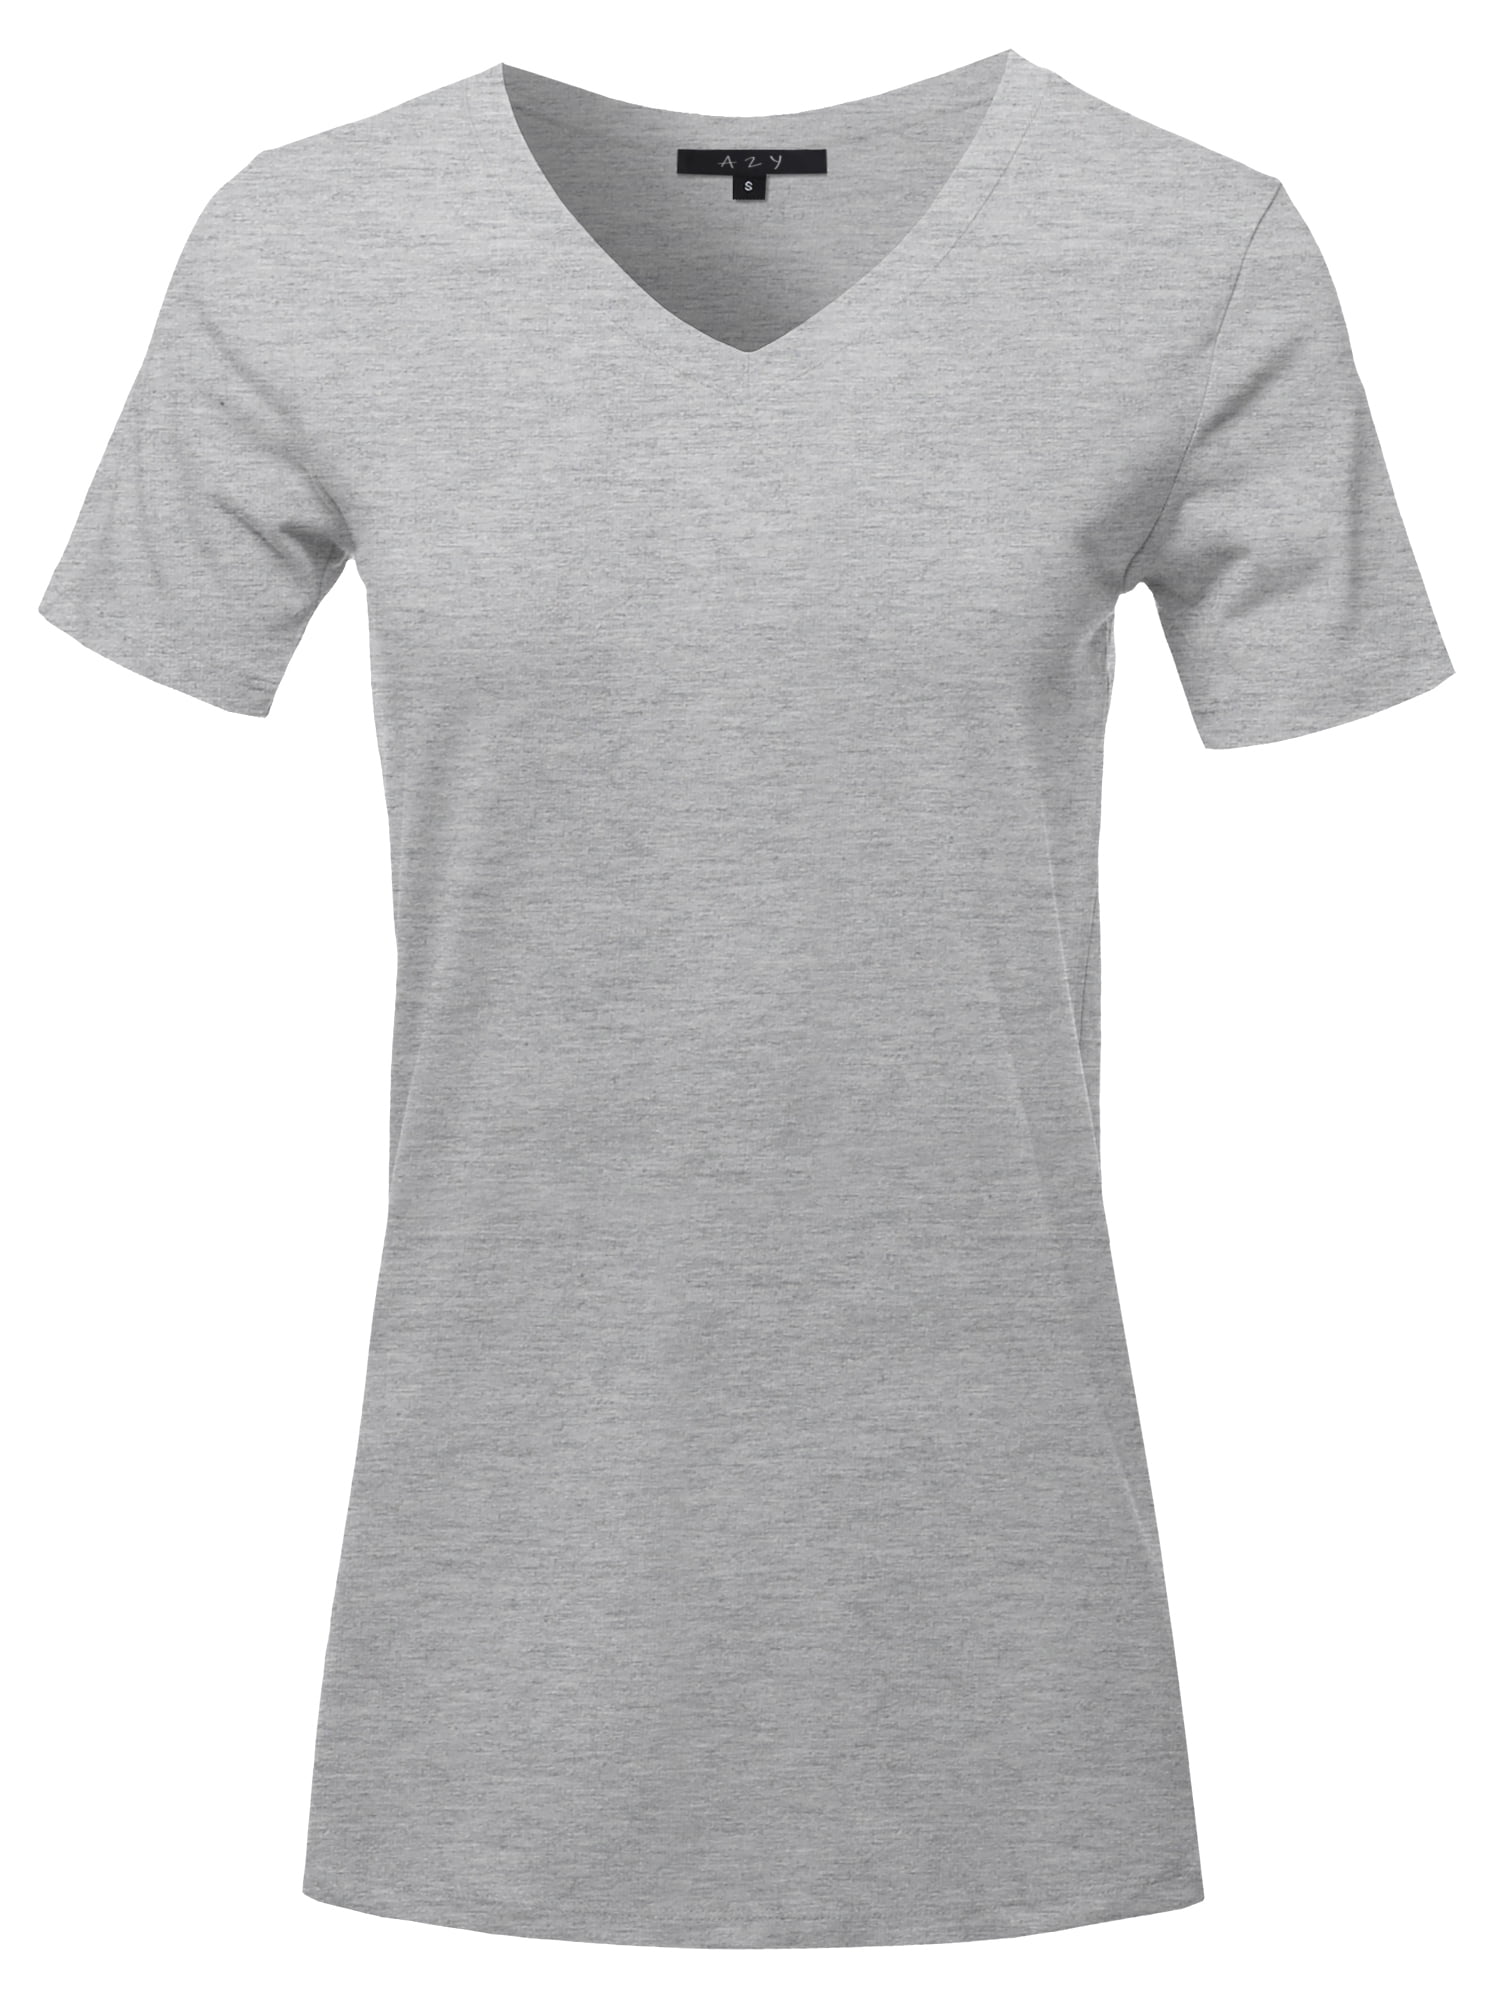 A2Y Women's Basic Solid Premium Cotton Short Sleeve V-neck T Shirt Tee ...